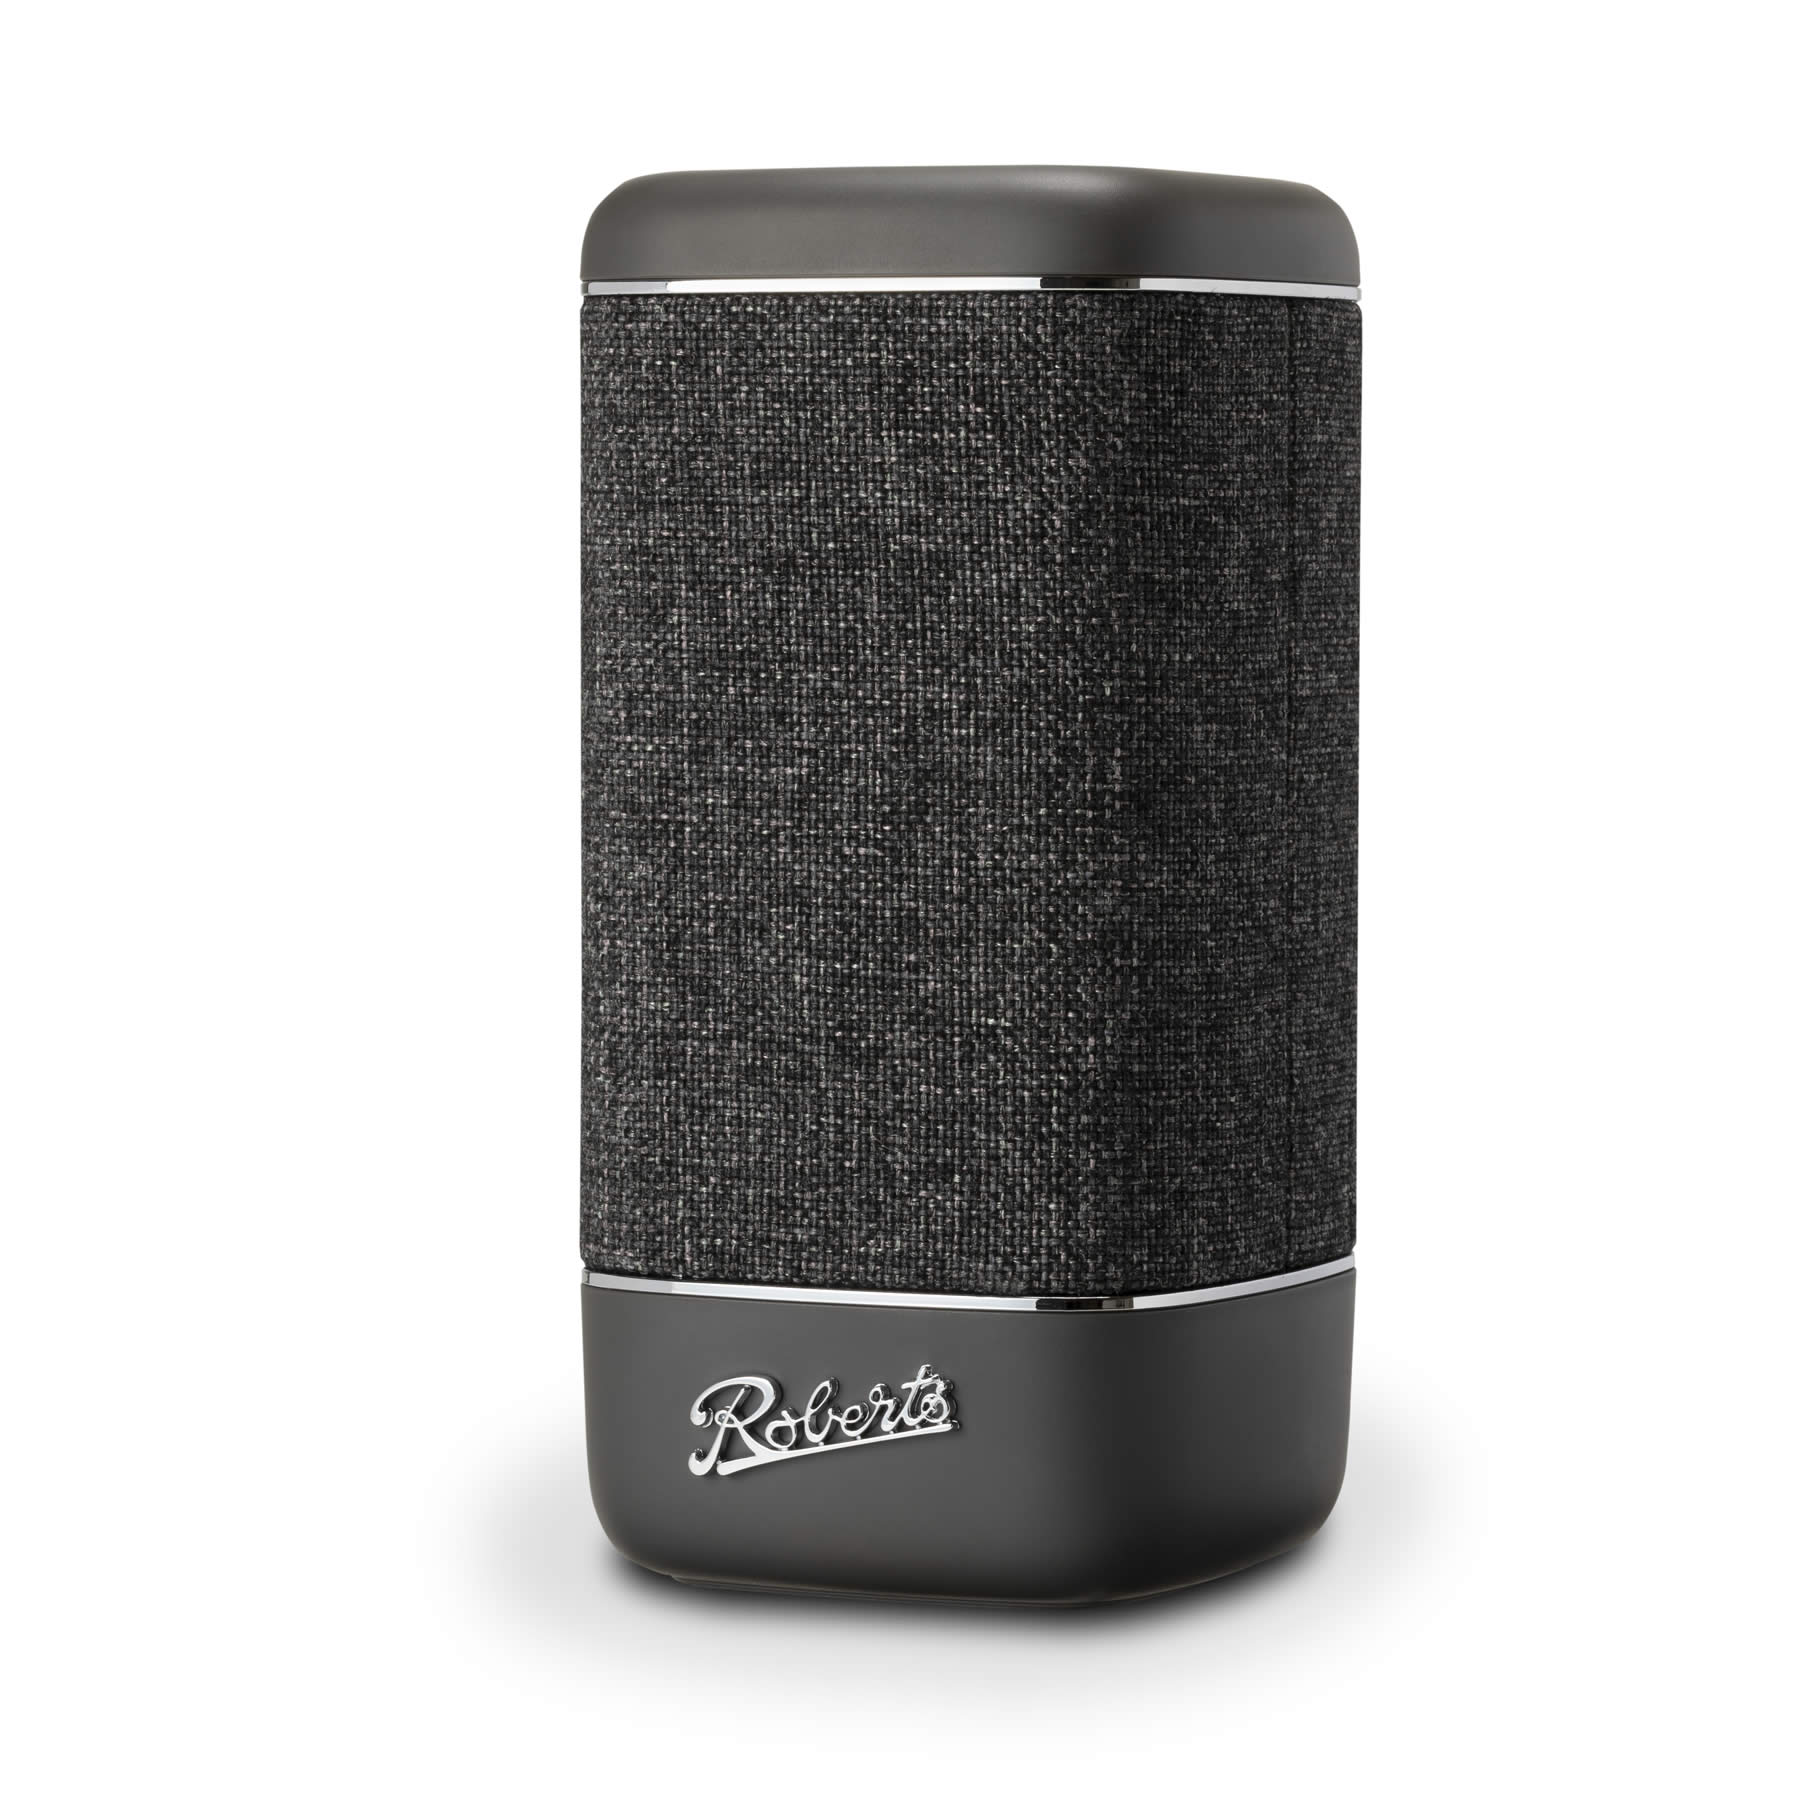 Roberts Bluetooth Speaker 12-hour Playback Charcoal Grey